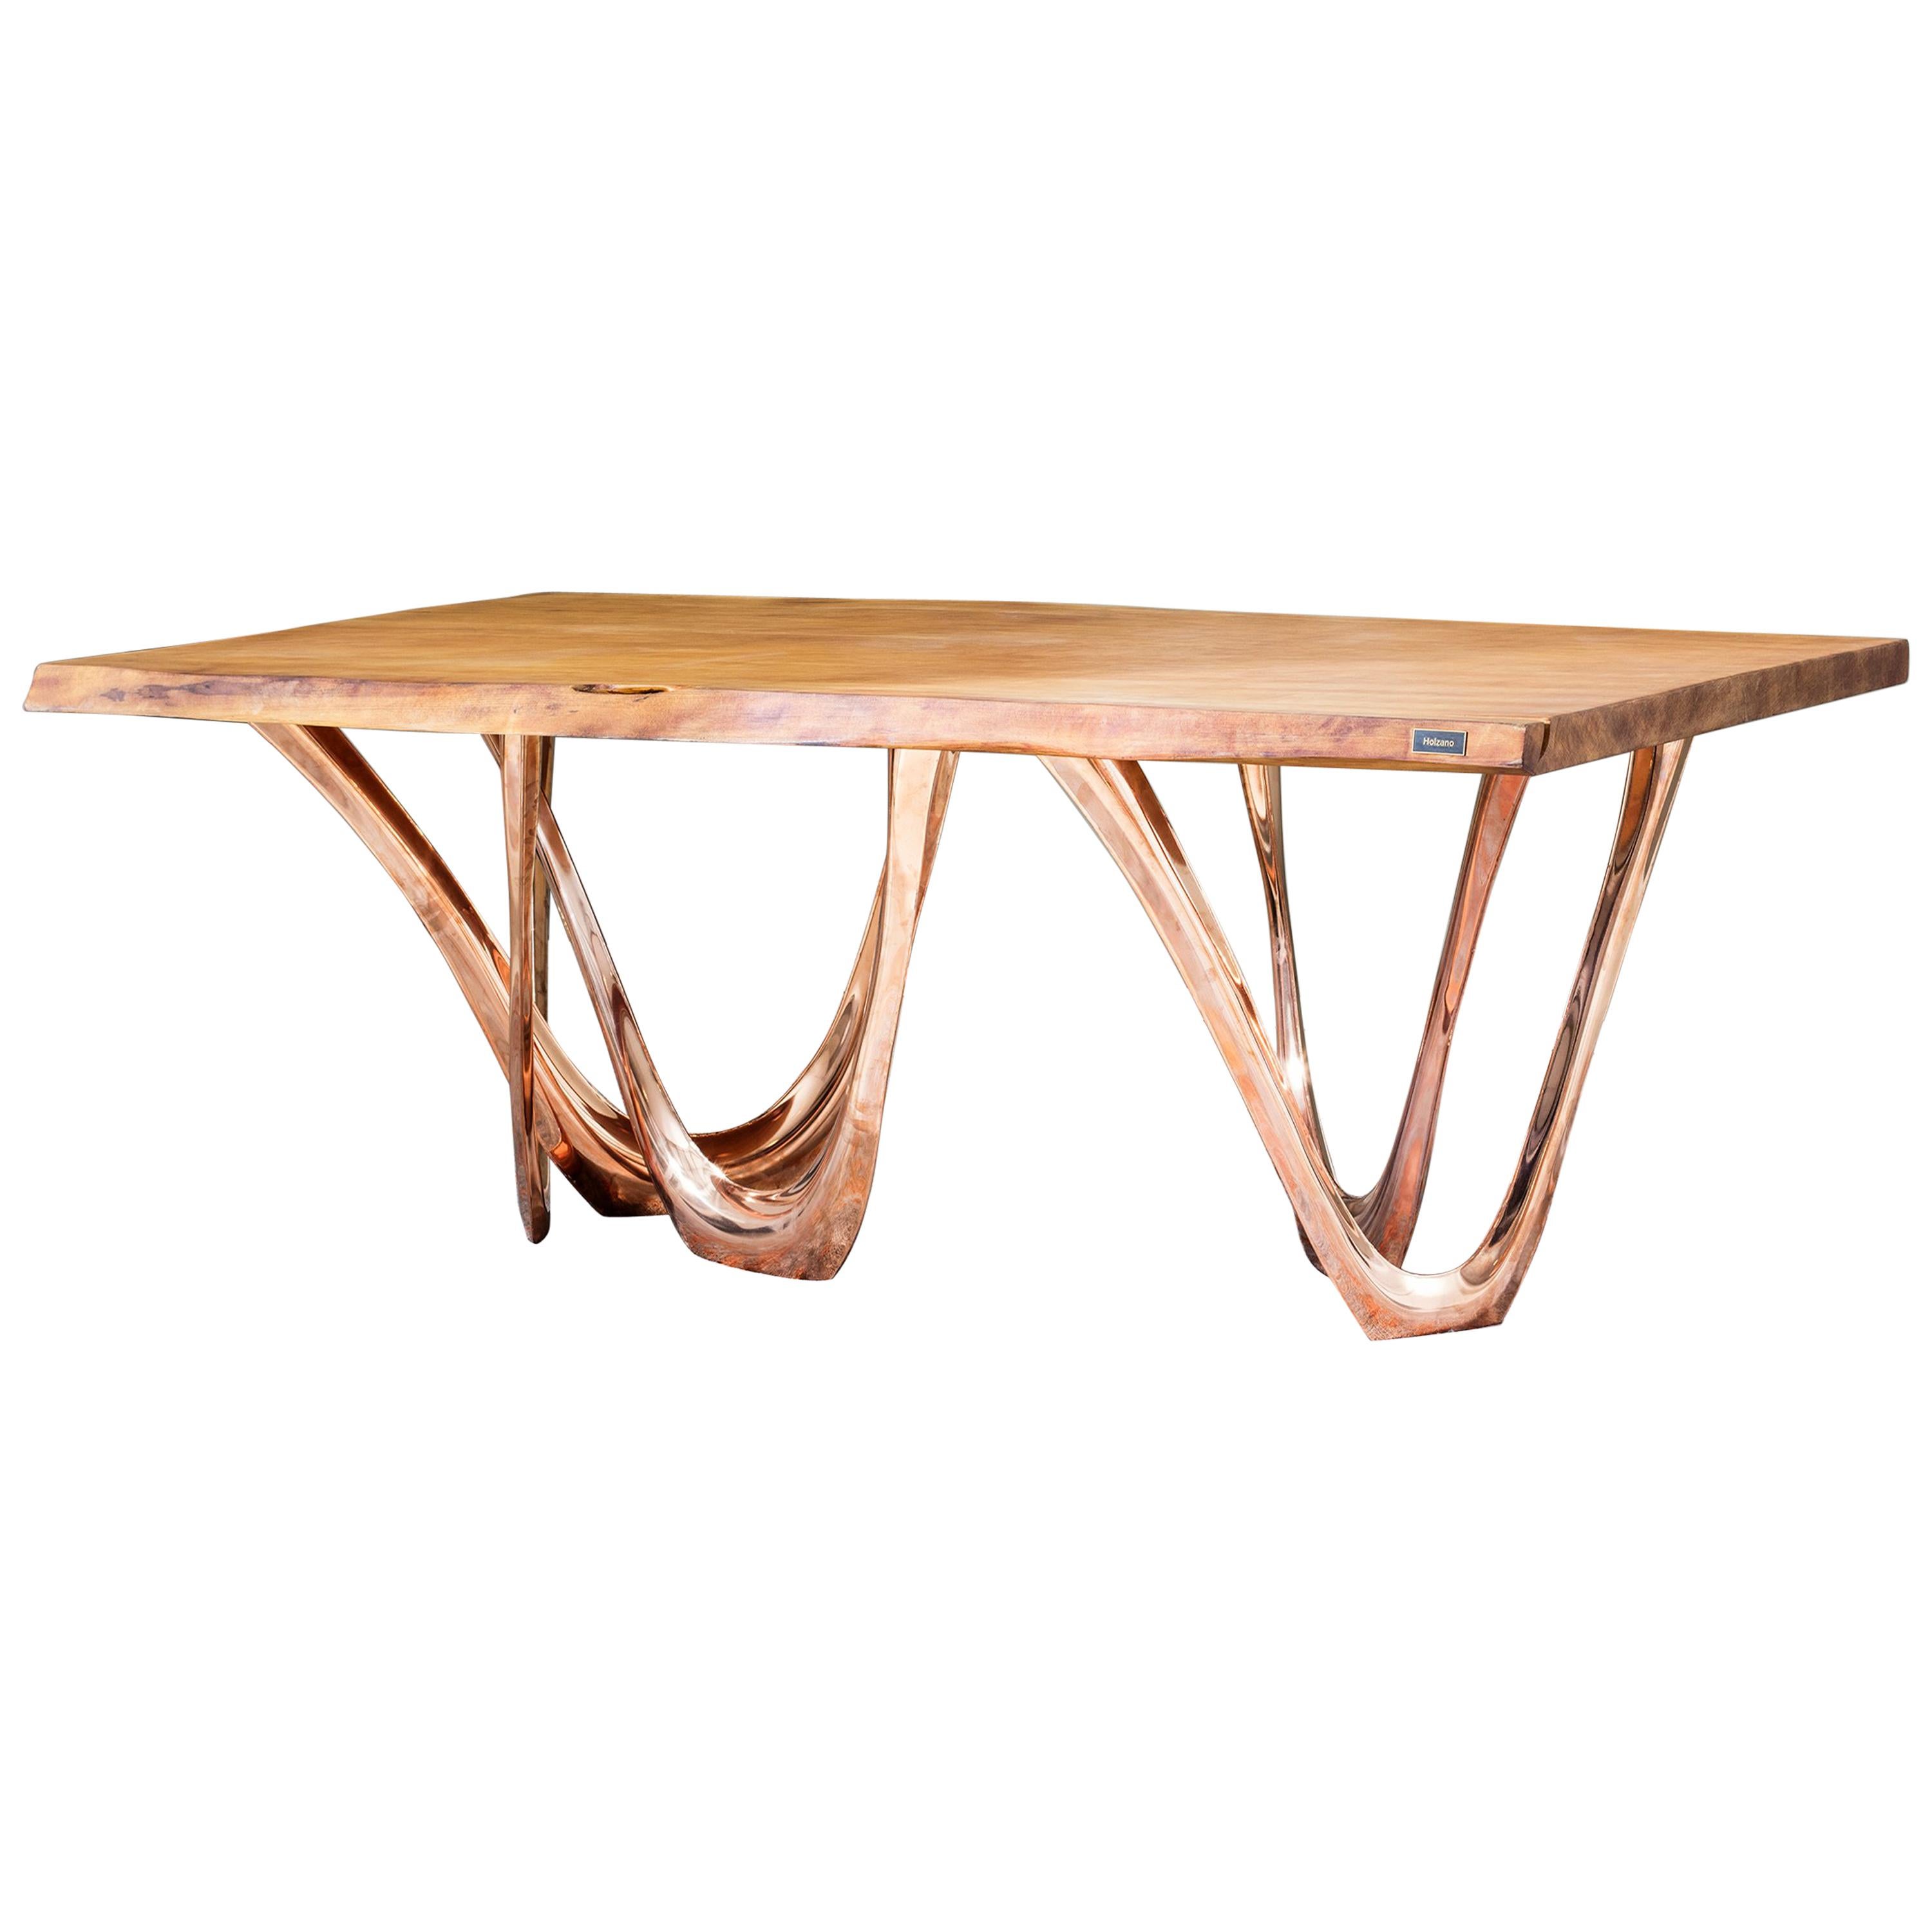 G-Table CU+K in Copper-Cladded Steel with Kauri Wood Top by Zieta